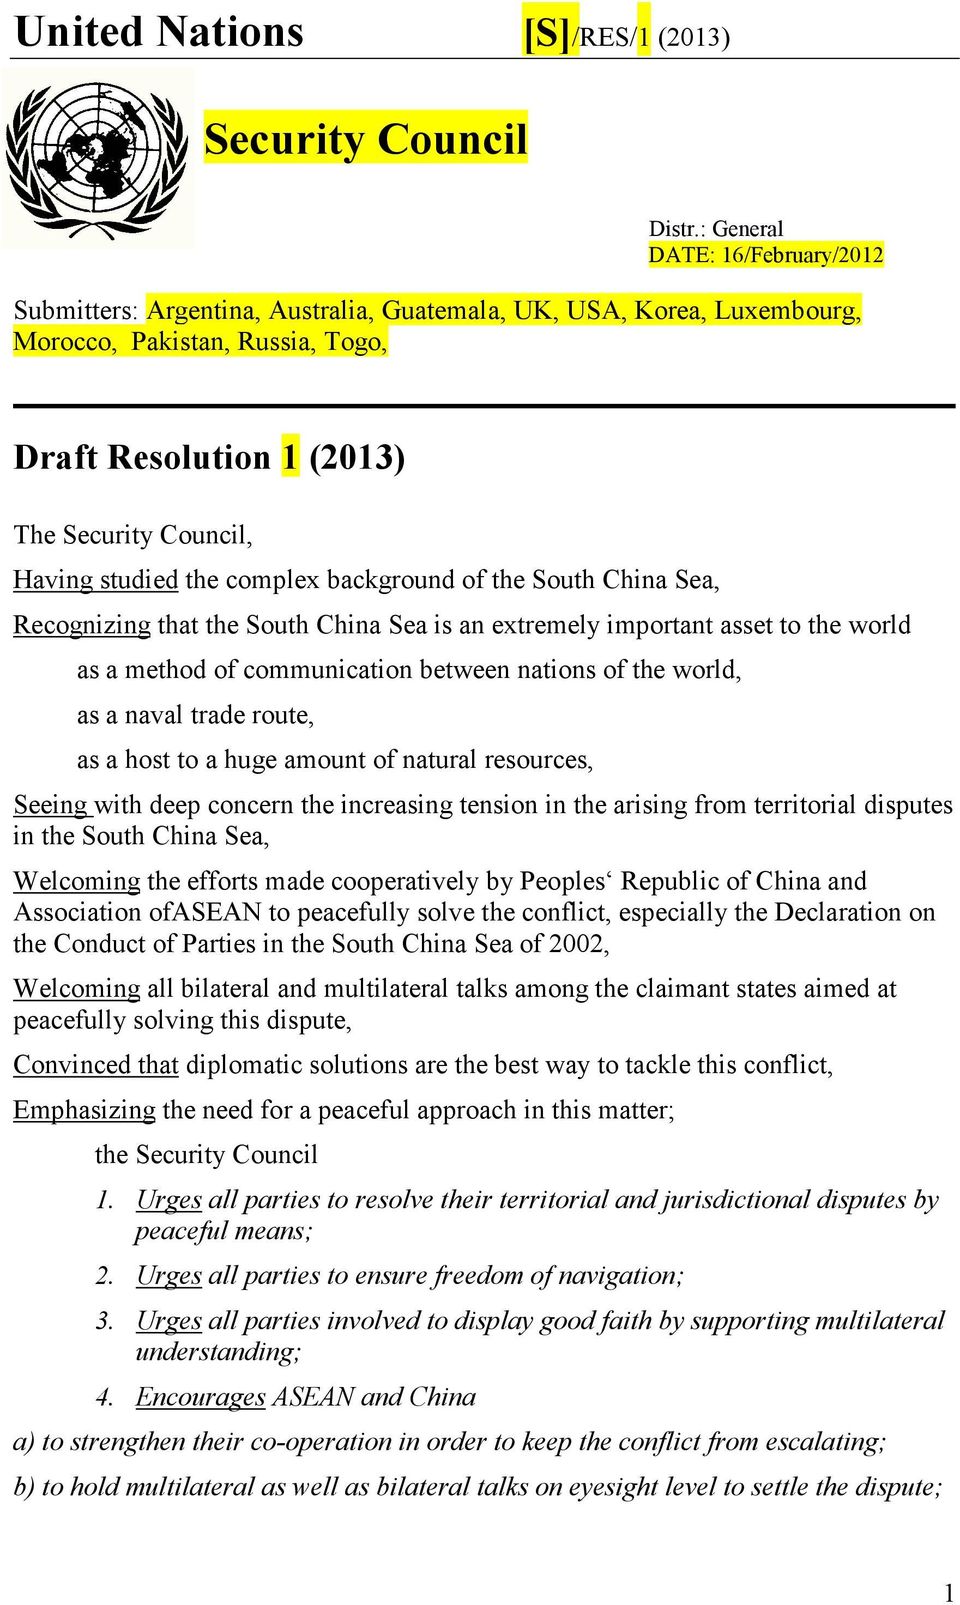 studied the complex background of the South China Sea, Recognizing that the South China Sea is an extremely important asset to the world as a method of communication between nations of the world, as